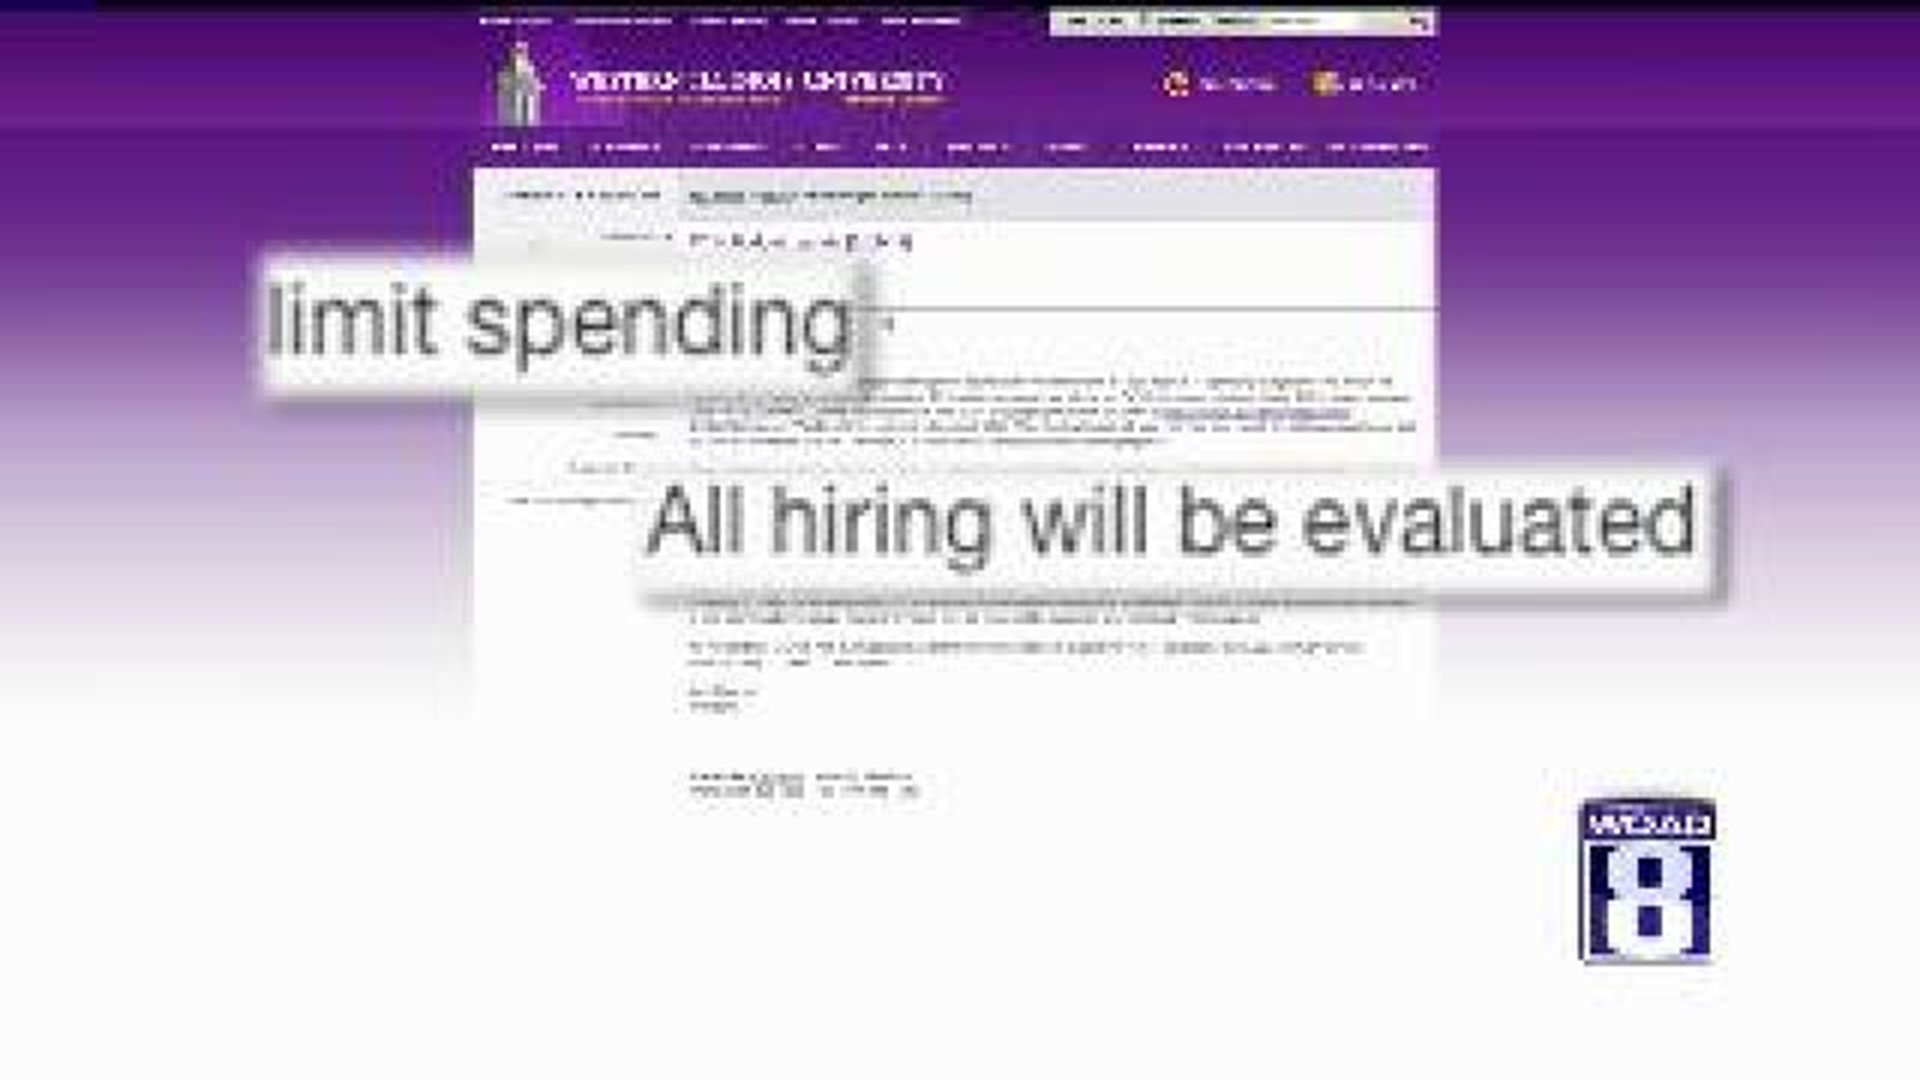 WIU To Limit Spending, Review Hiring Process